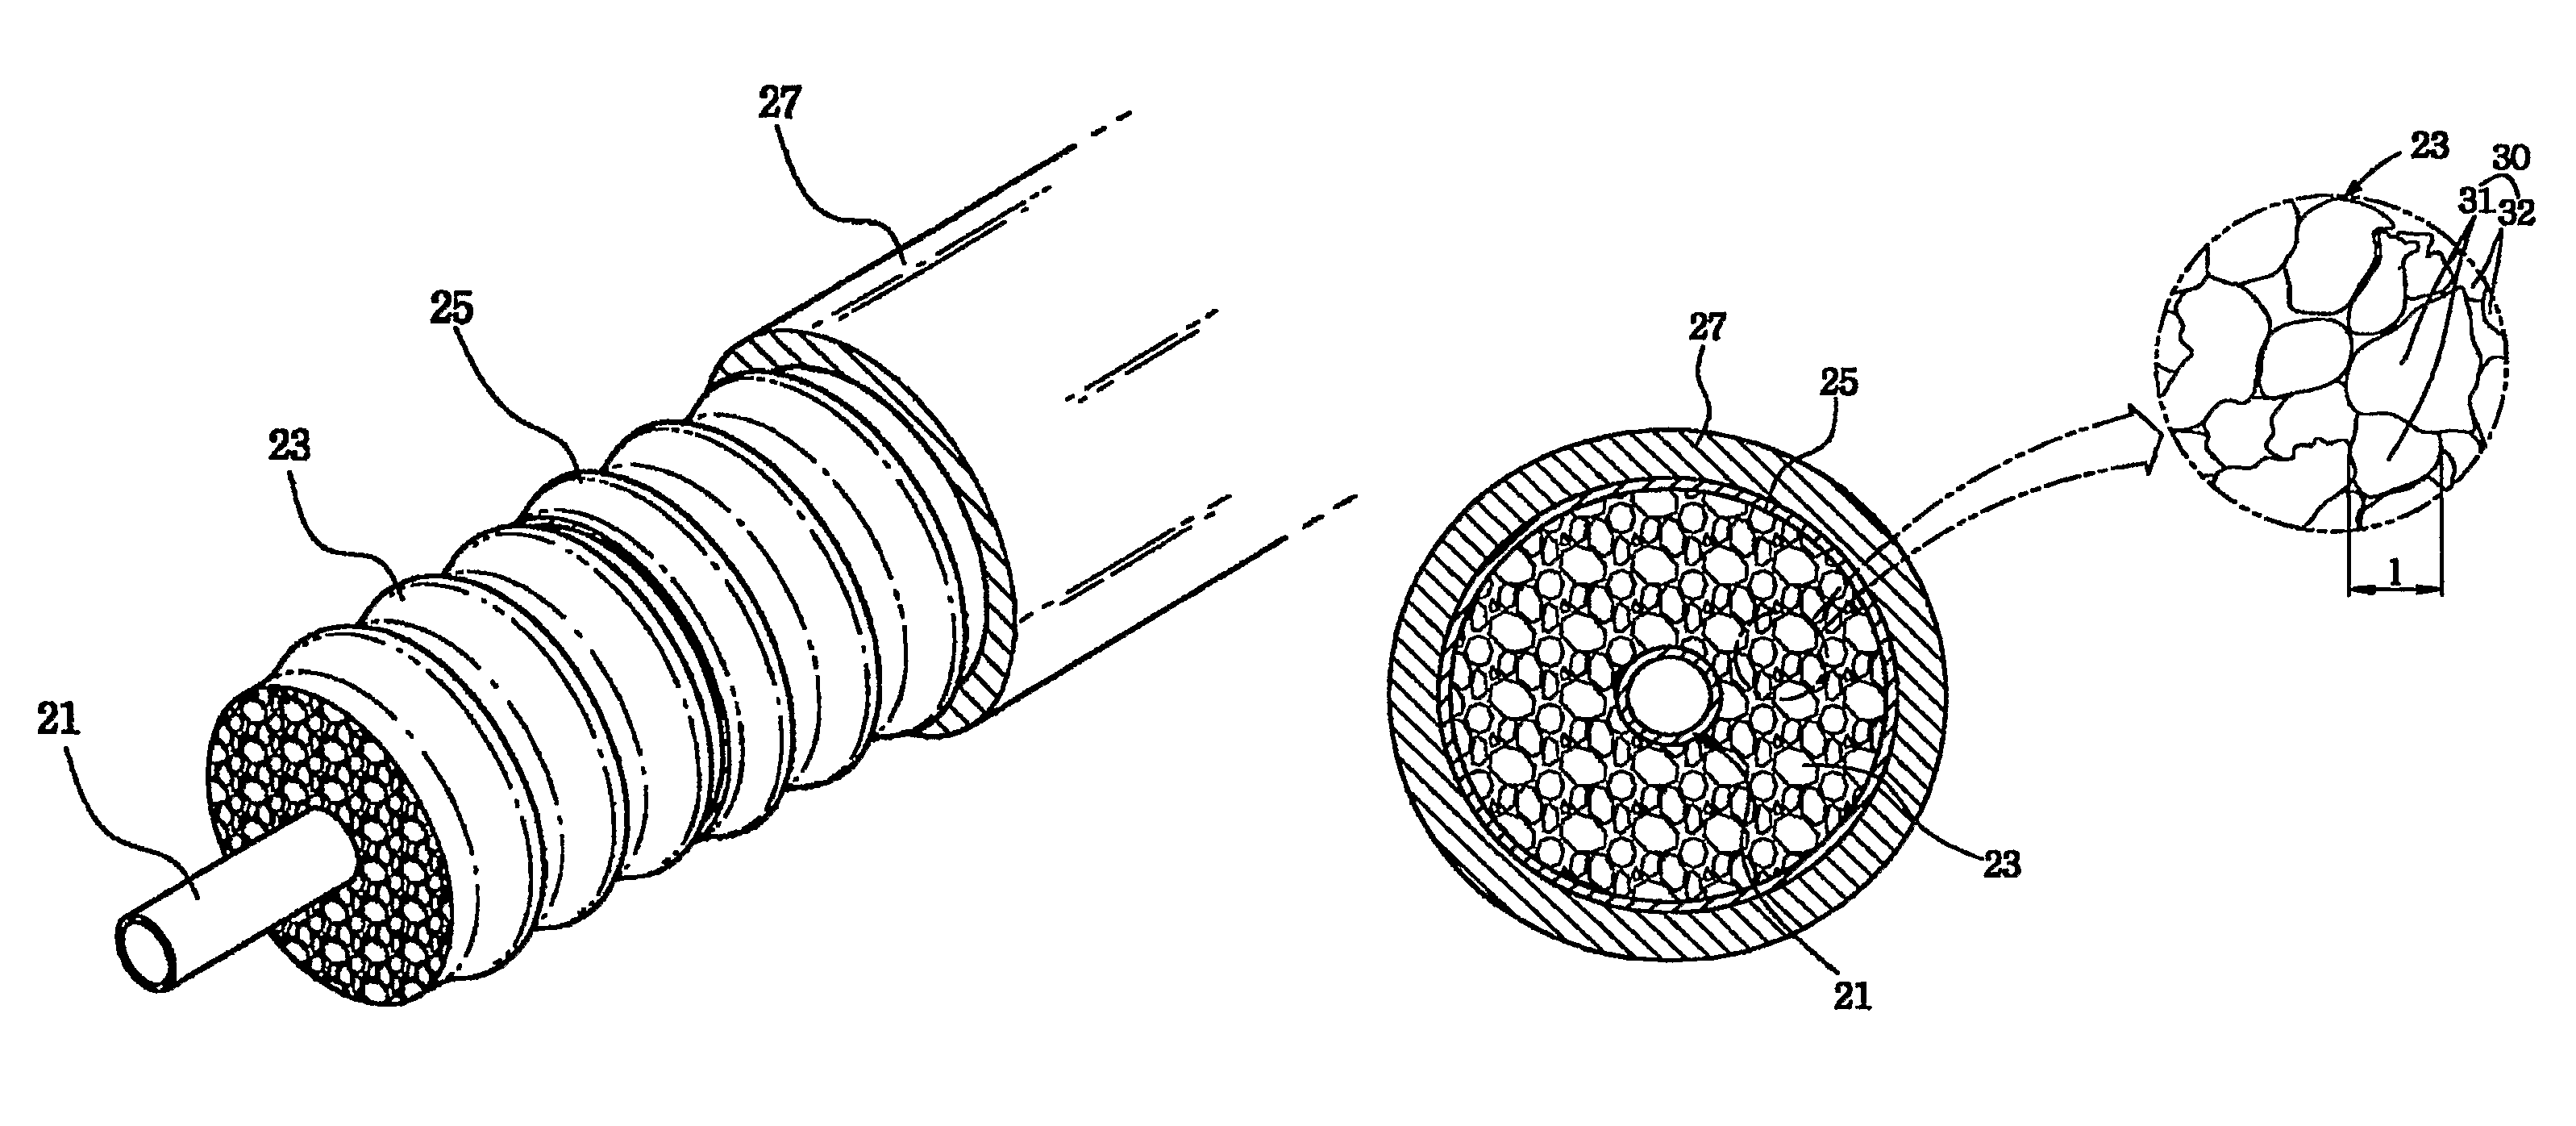 Highly foamed coaxial cable